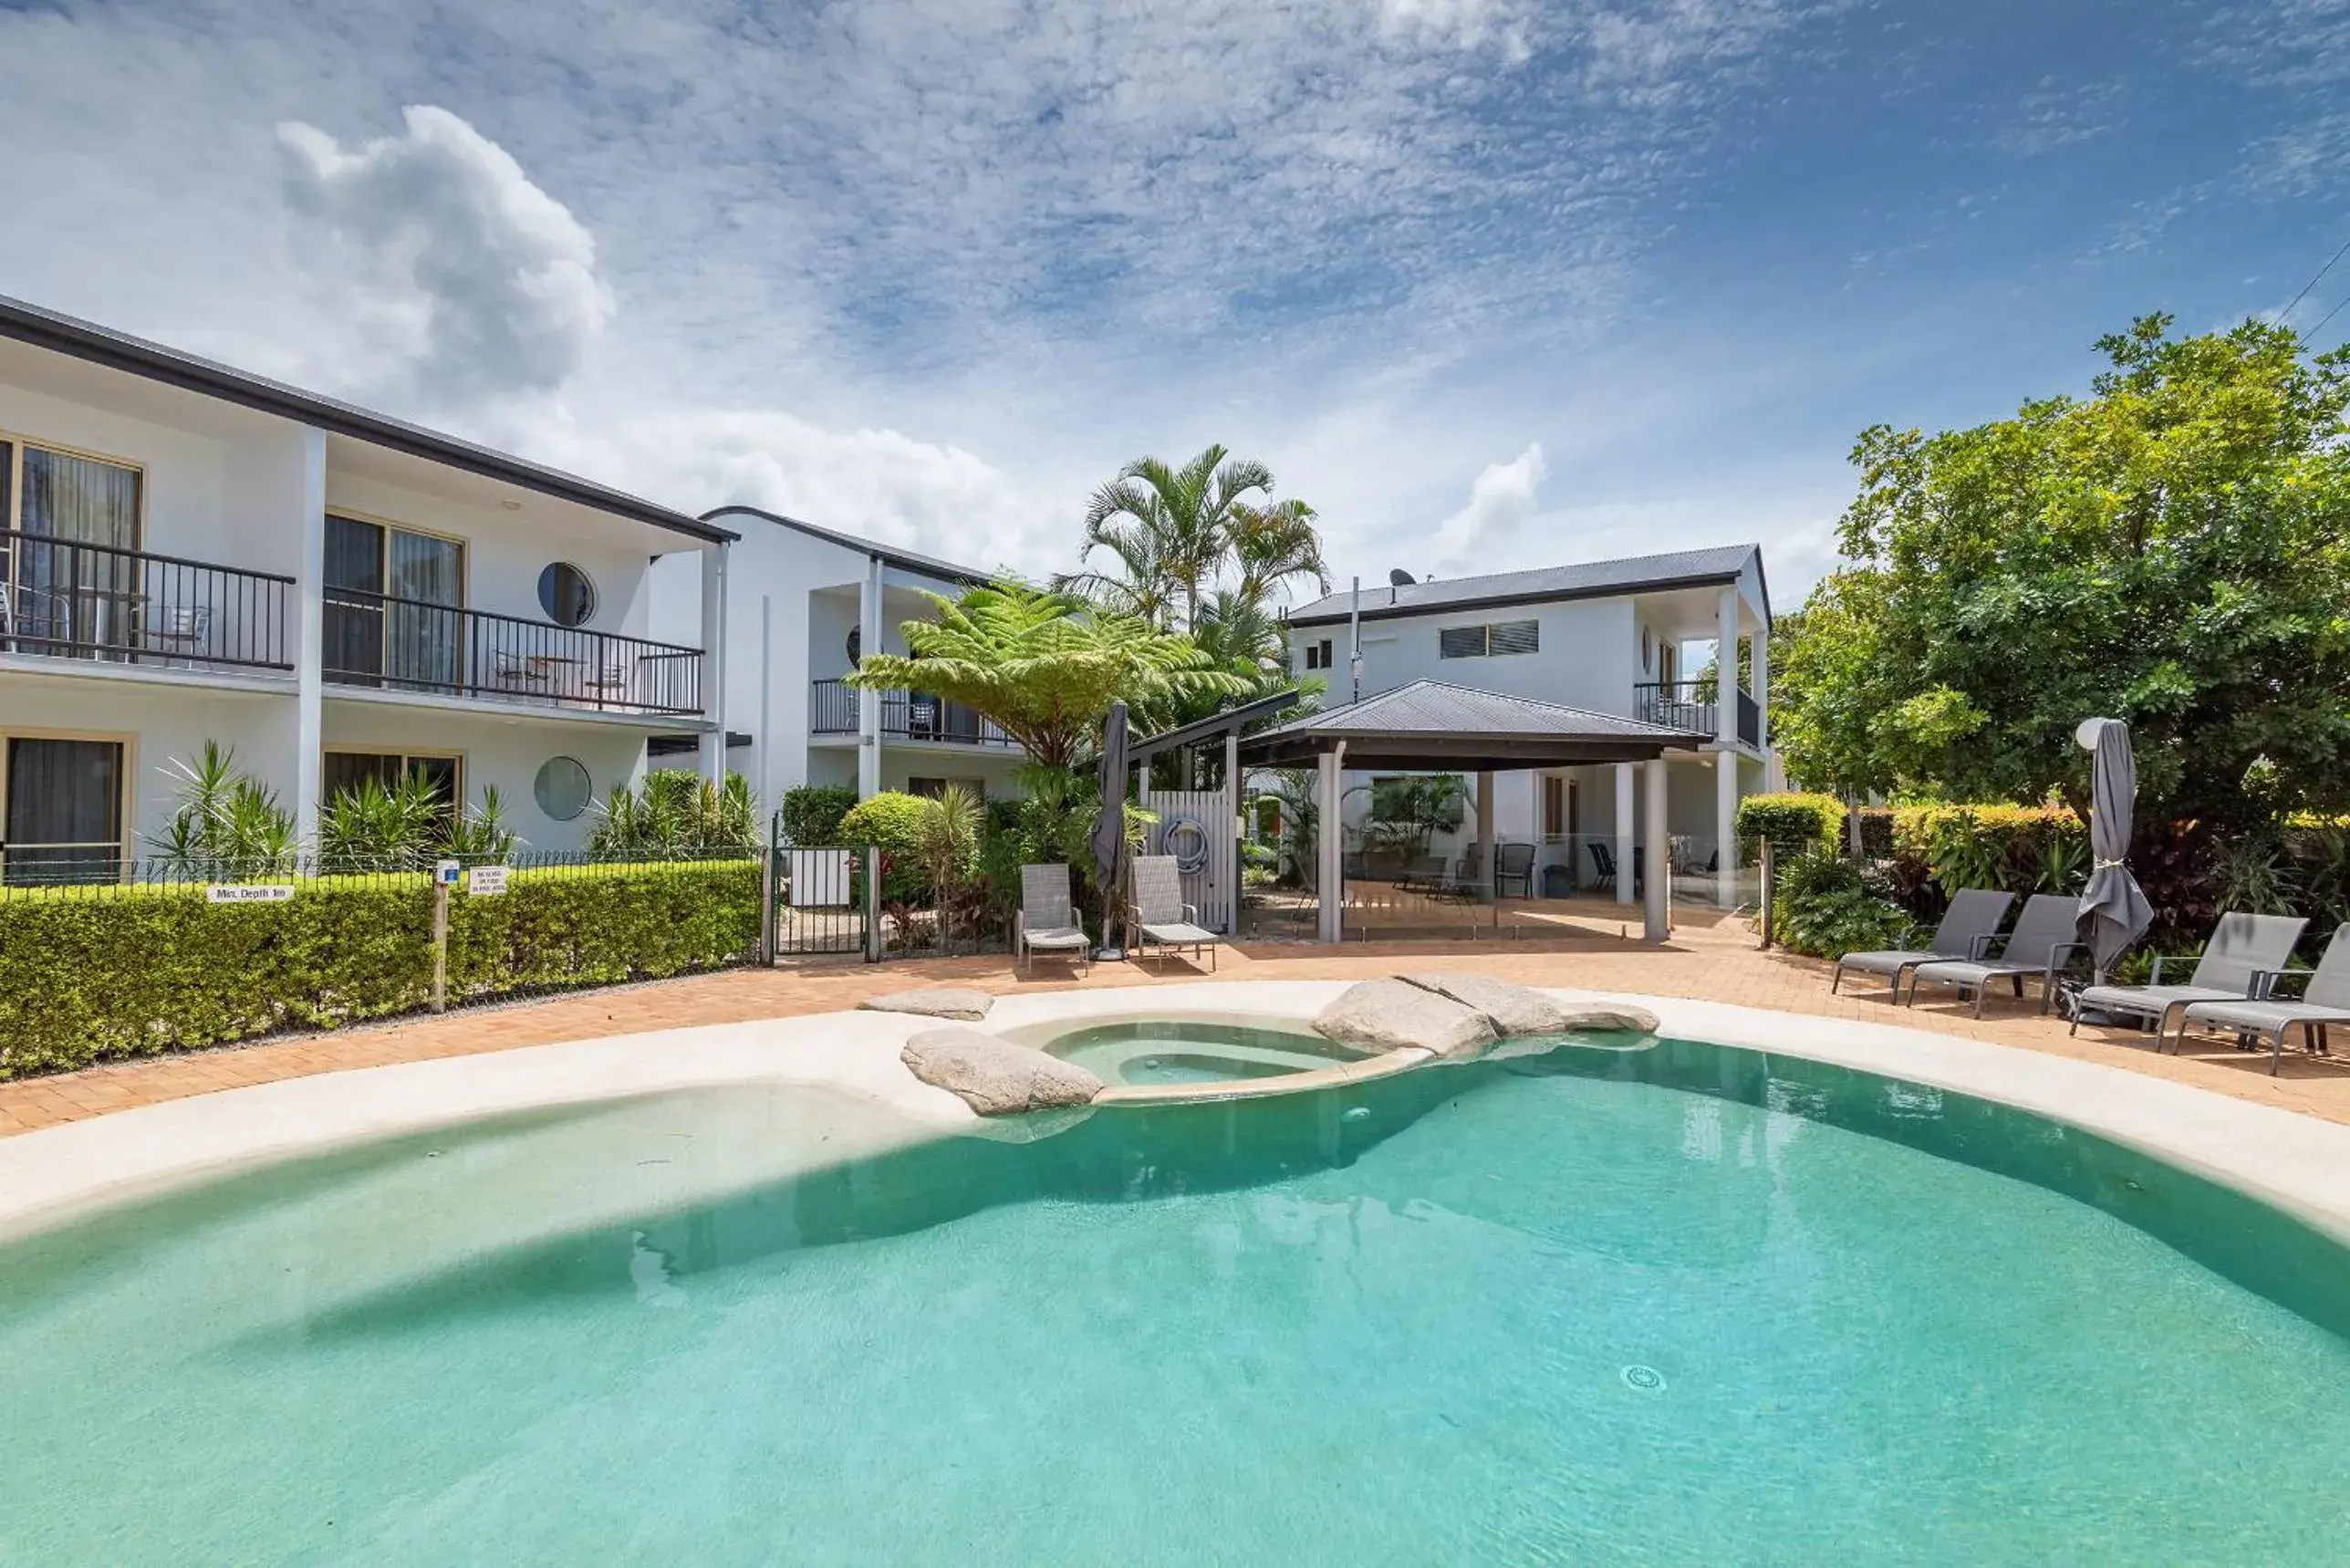 Property building, Swimming Pool in Anchor Motel Noosa